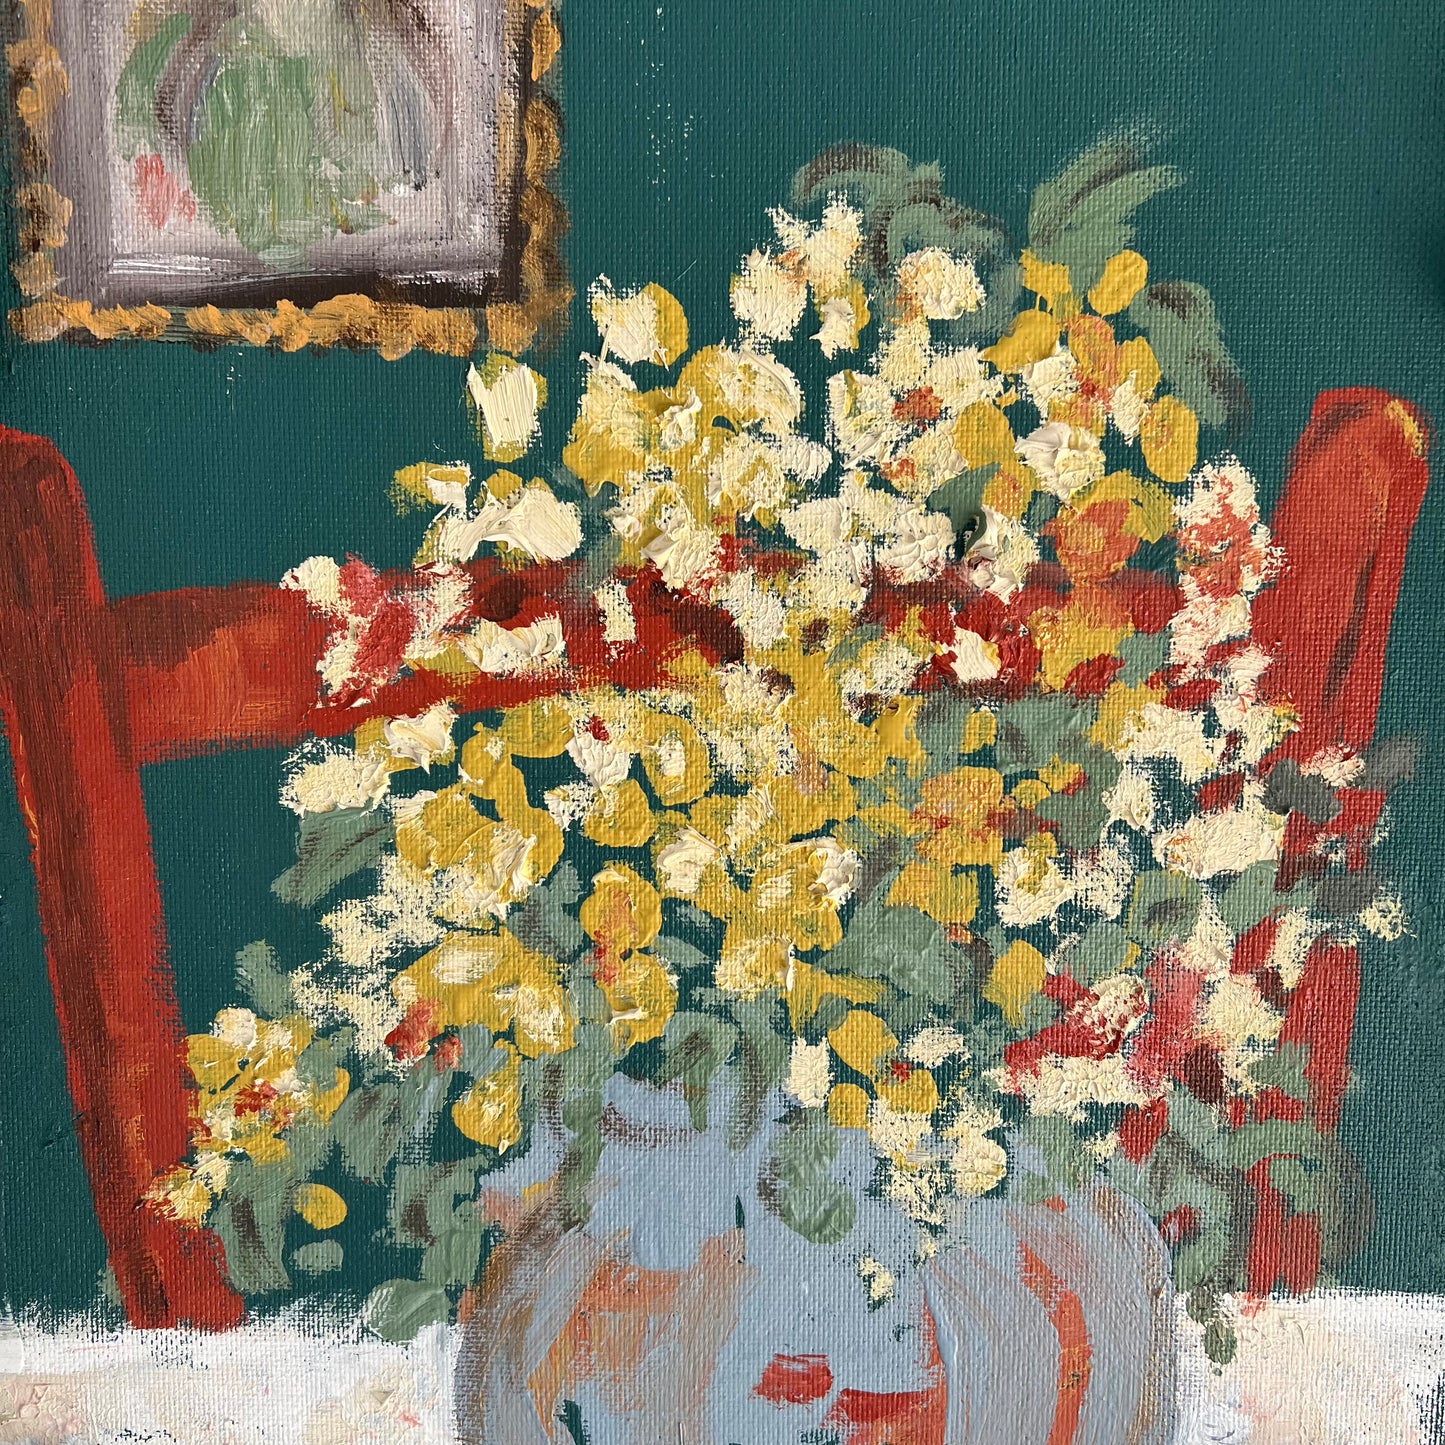 Vintage Painting Interior Scene Flowers with Red Chair and Portrait